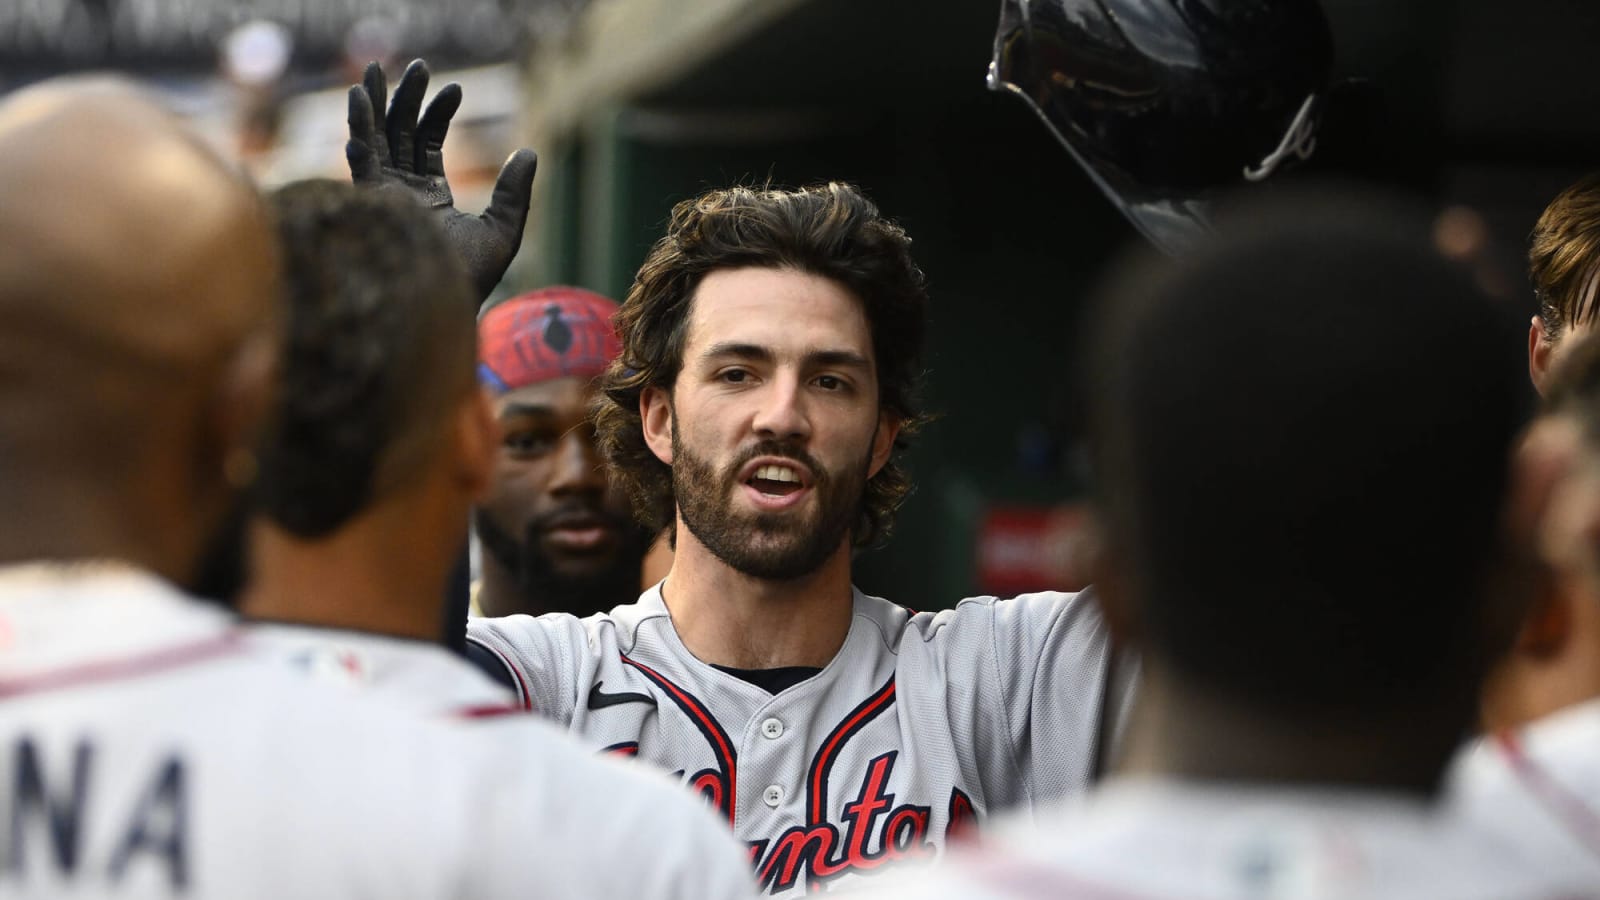 Dansby Swanson: Prop Bets vs. Nationals